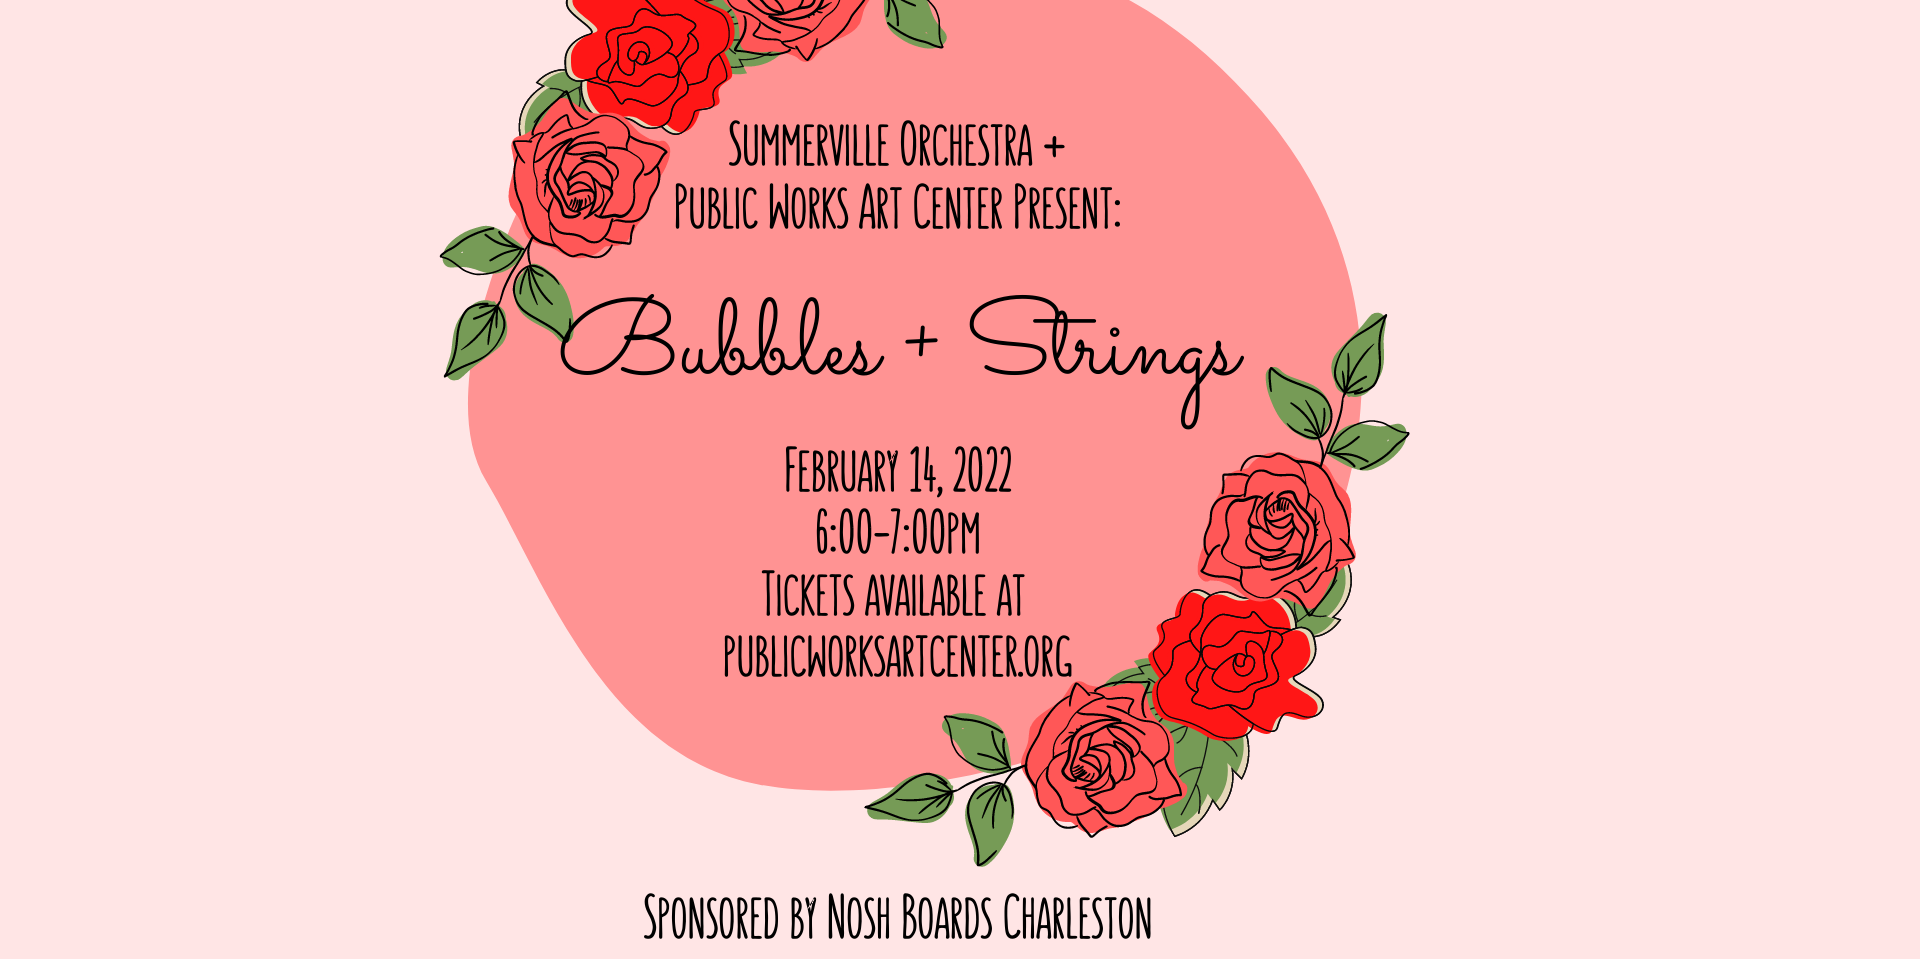 Bubbles and Strings Valentines Orchestra Event  promotional image